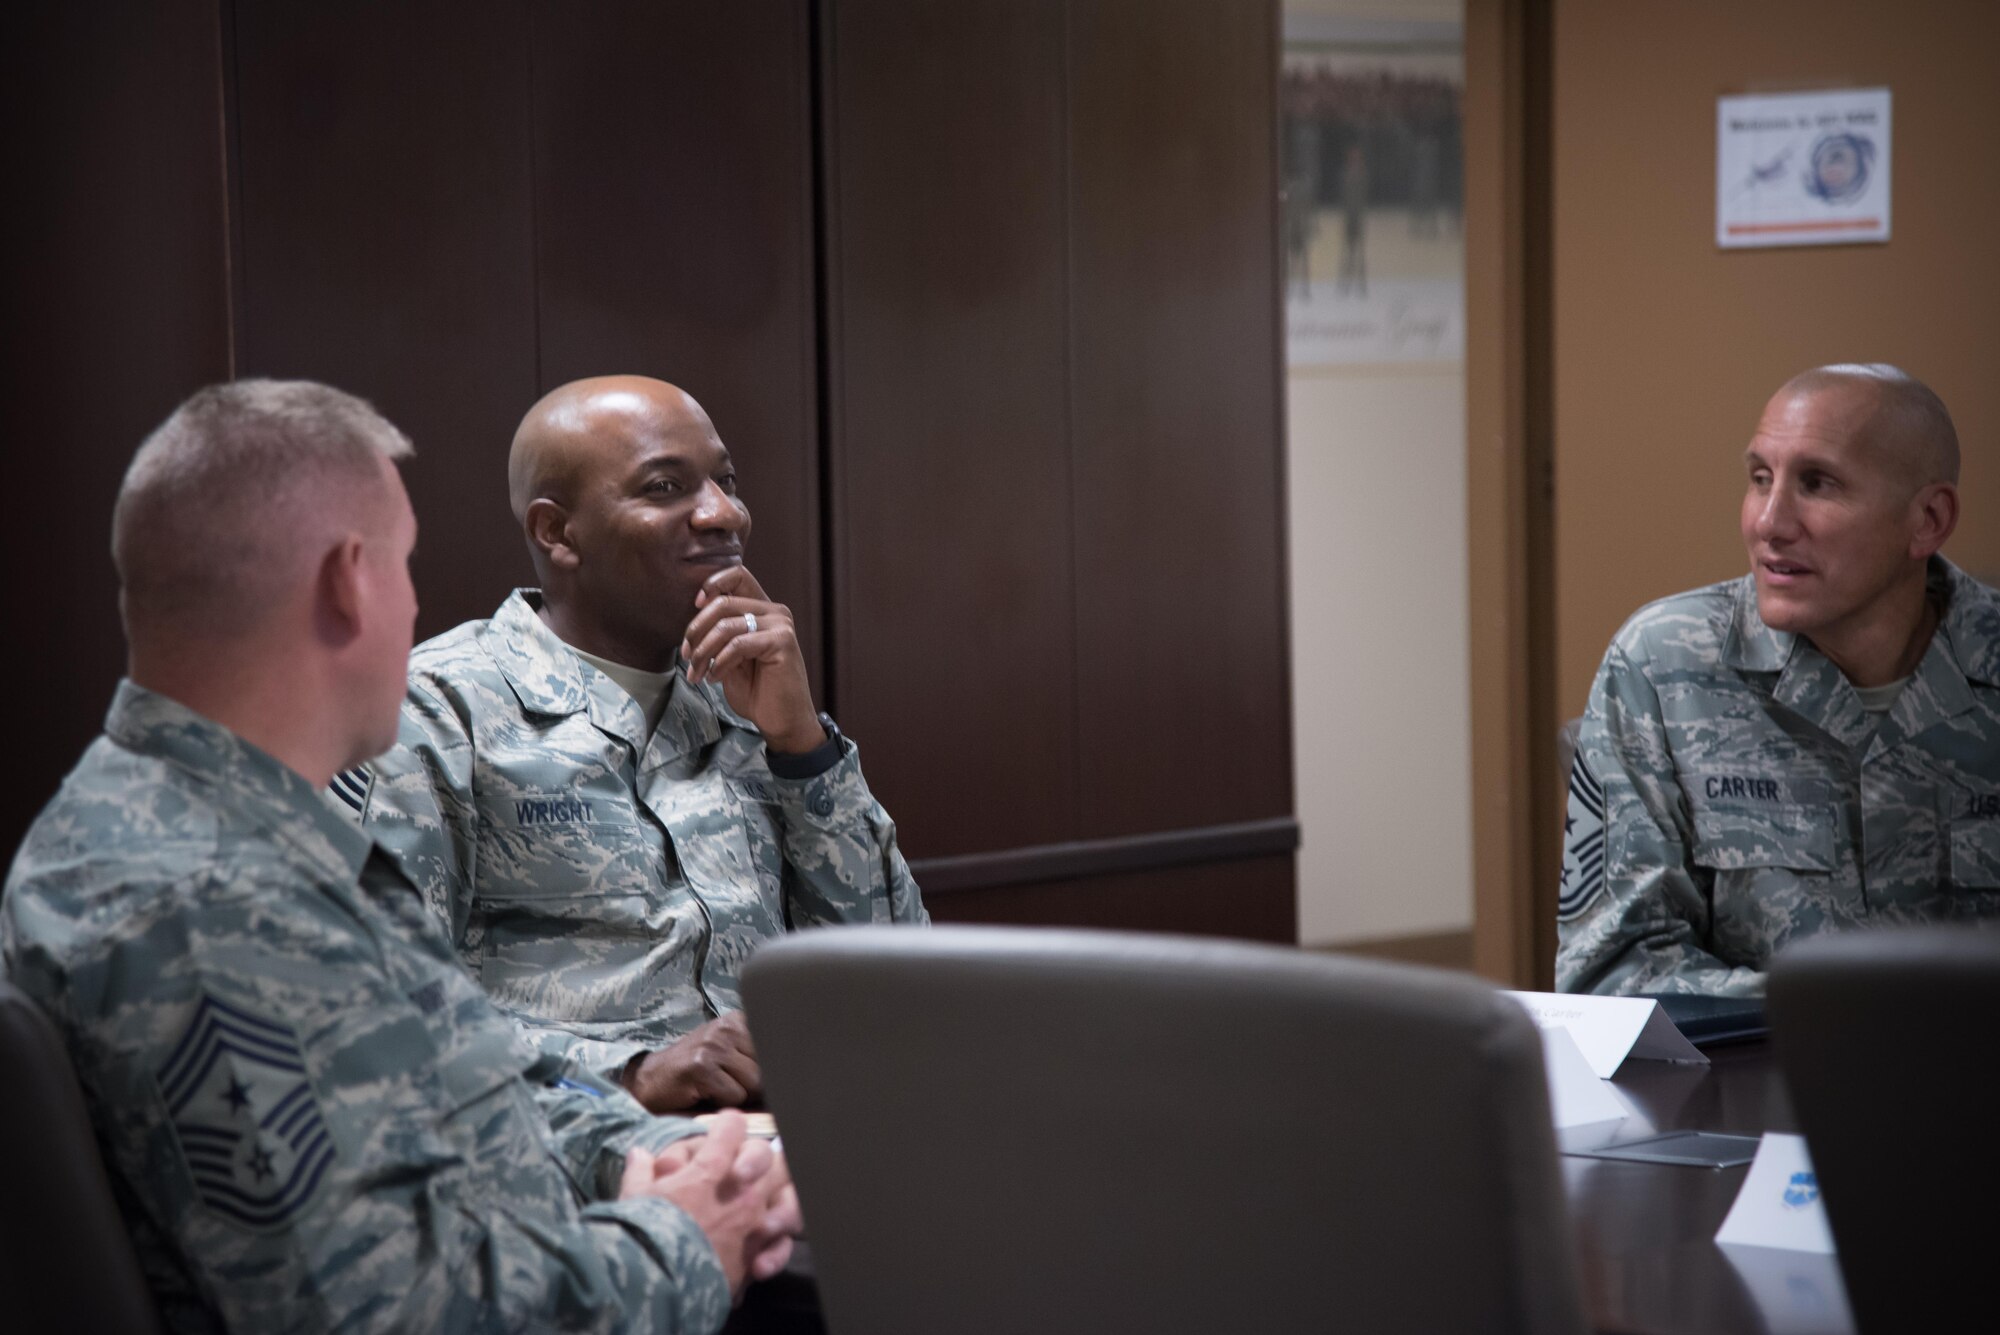 Chief Master Sergeant of the Air Force Kaleth O. Wright listens to the 403rd Wing mission brief presented by Senior Master Sgt. Thomas Lassabe, 403rd Maintenance Squadron, during his visit to the 403rd Wing Oct. 25, 2017 at Keelser Air Force Base, Mississippi. (U.S. Air Force photo/Staff Sgt. Heather Heiney)